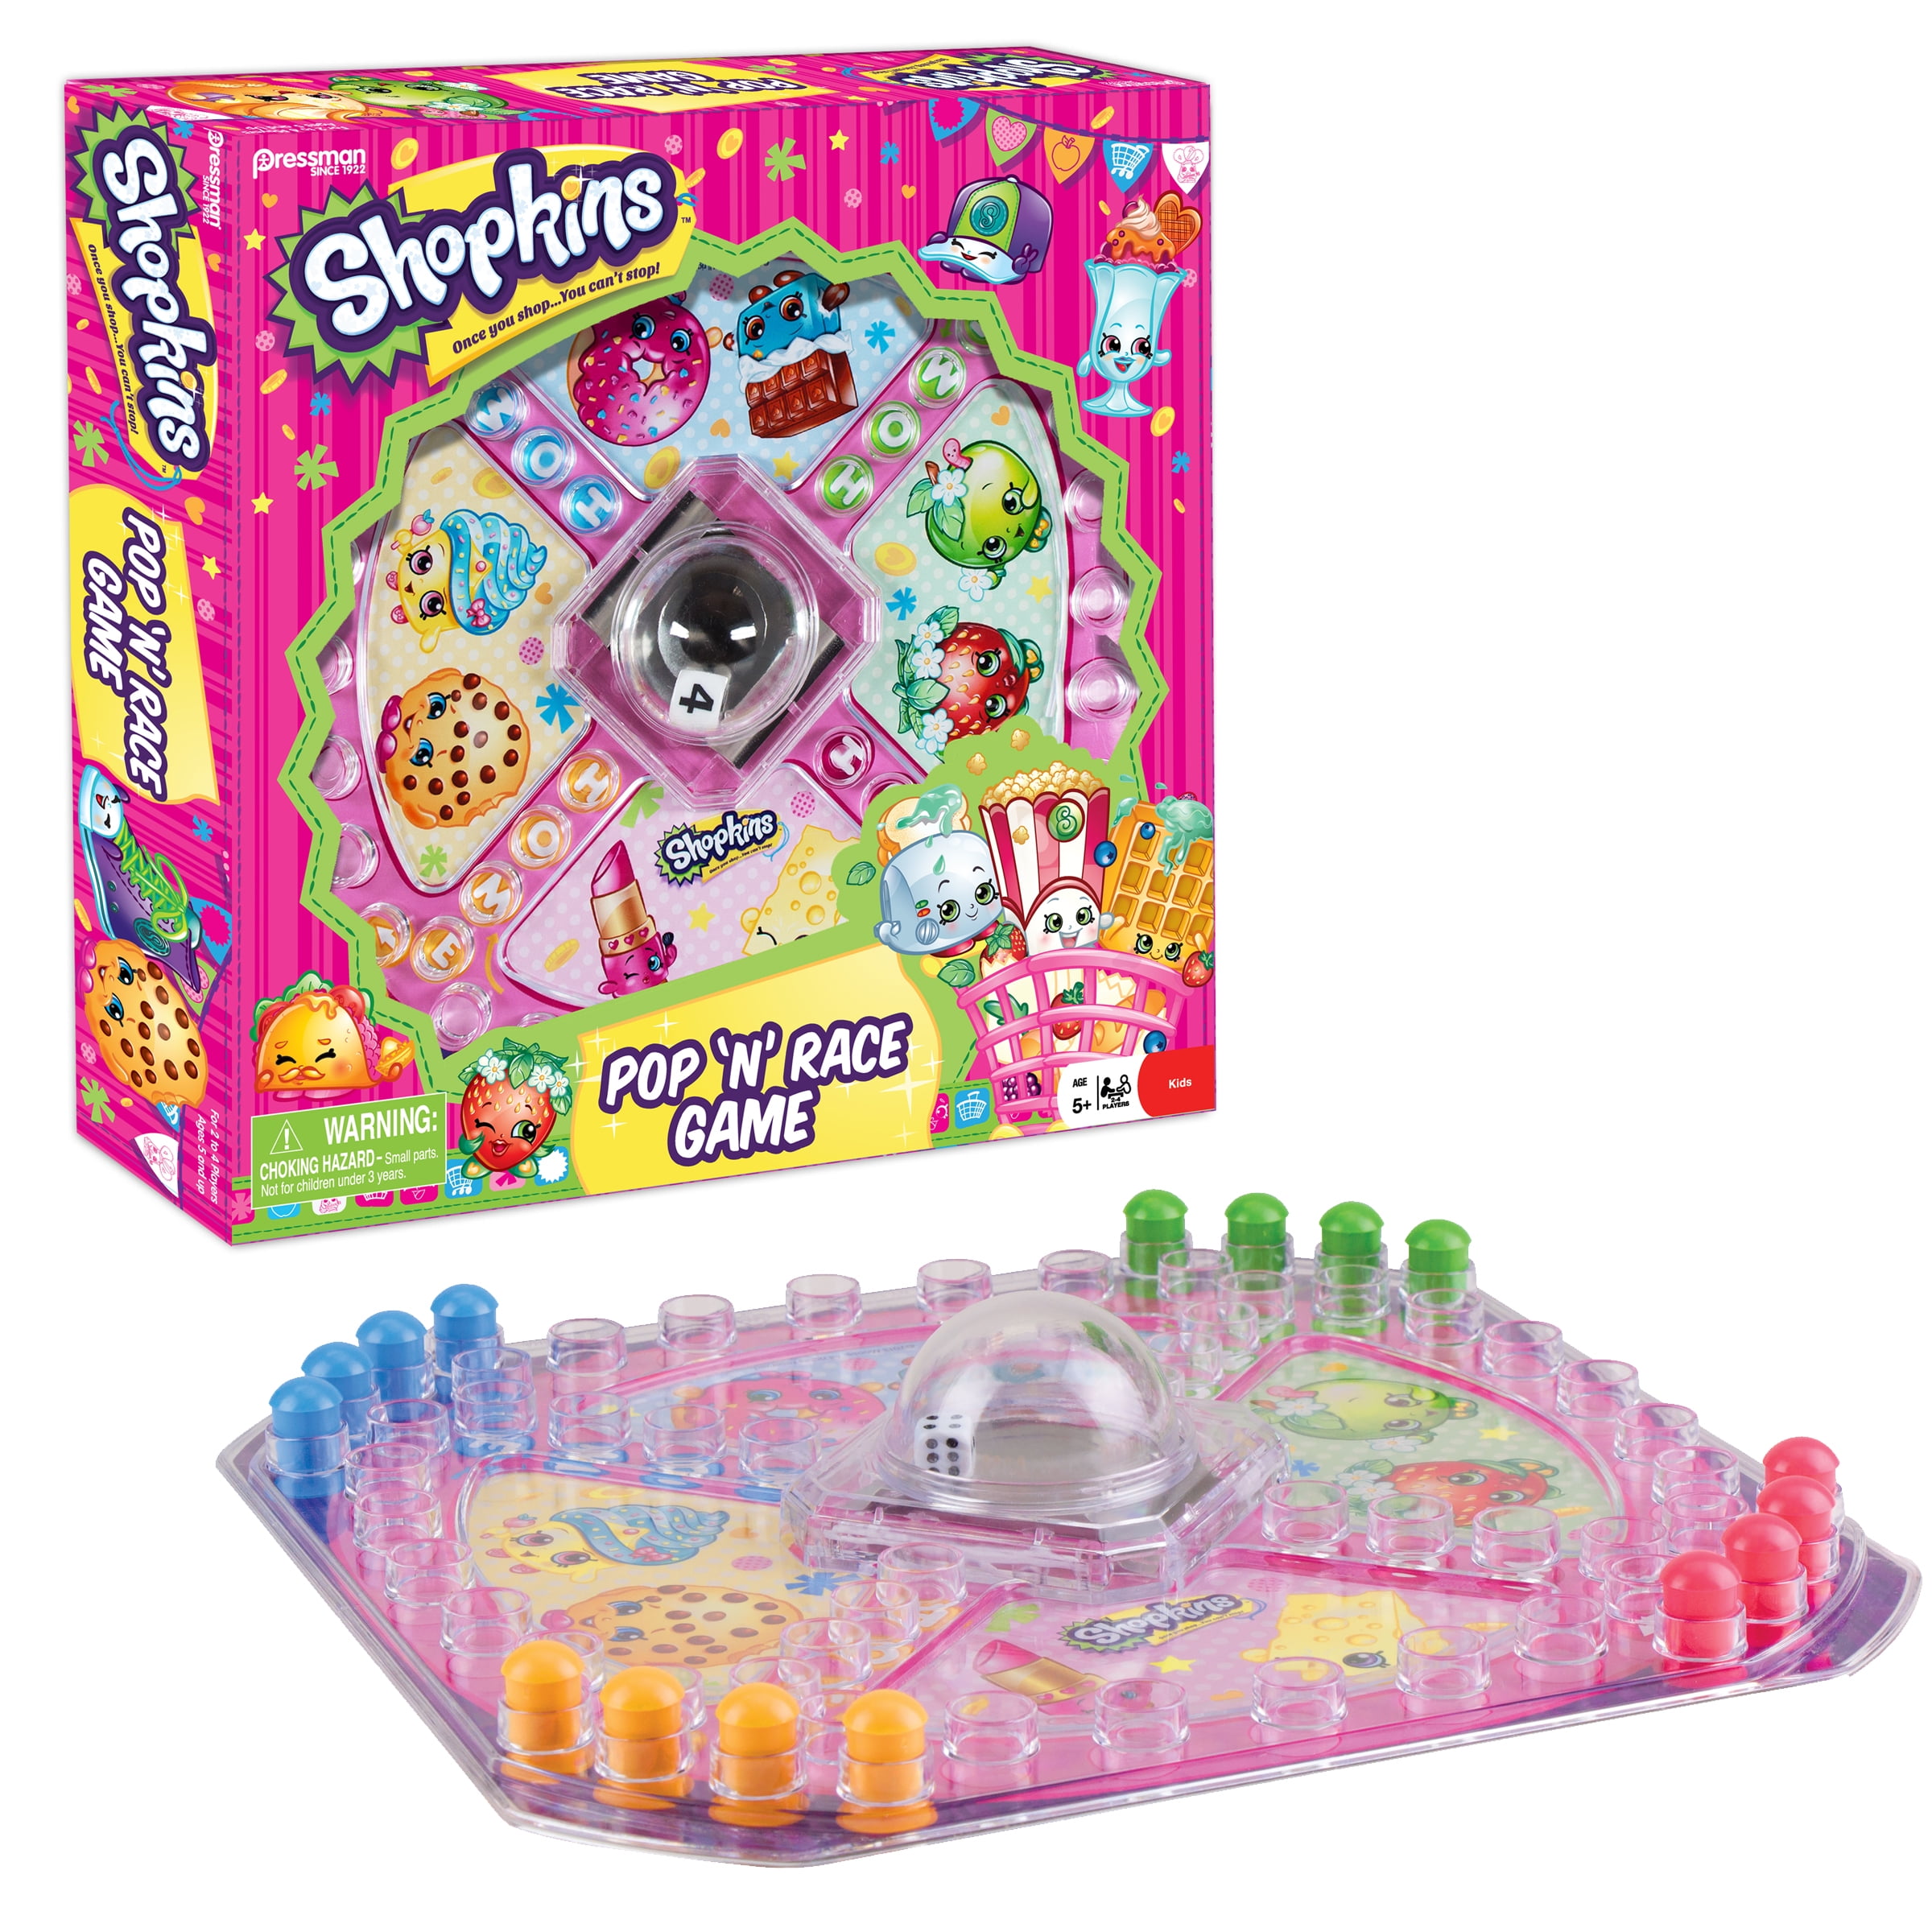 Details about  / New Shopkins Pop ‘N’ Race Game